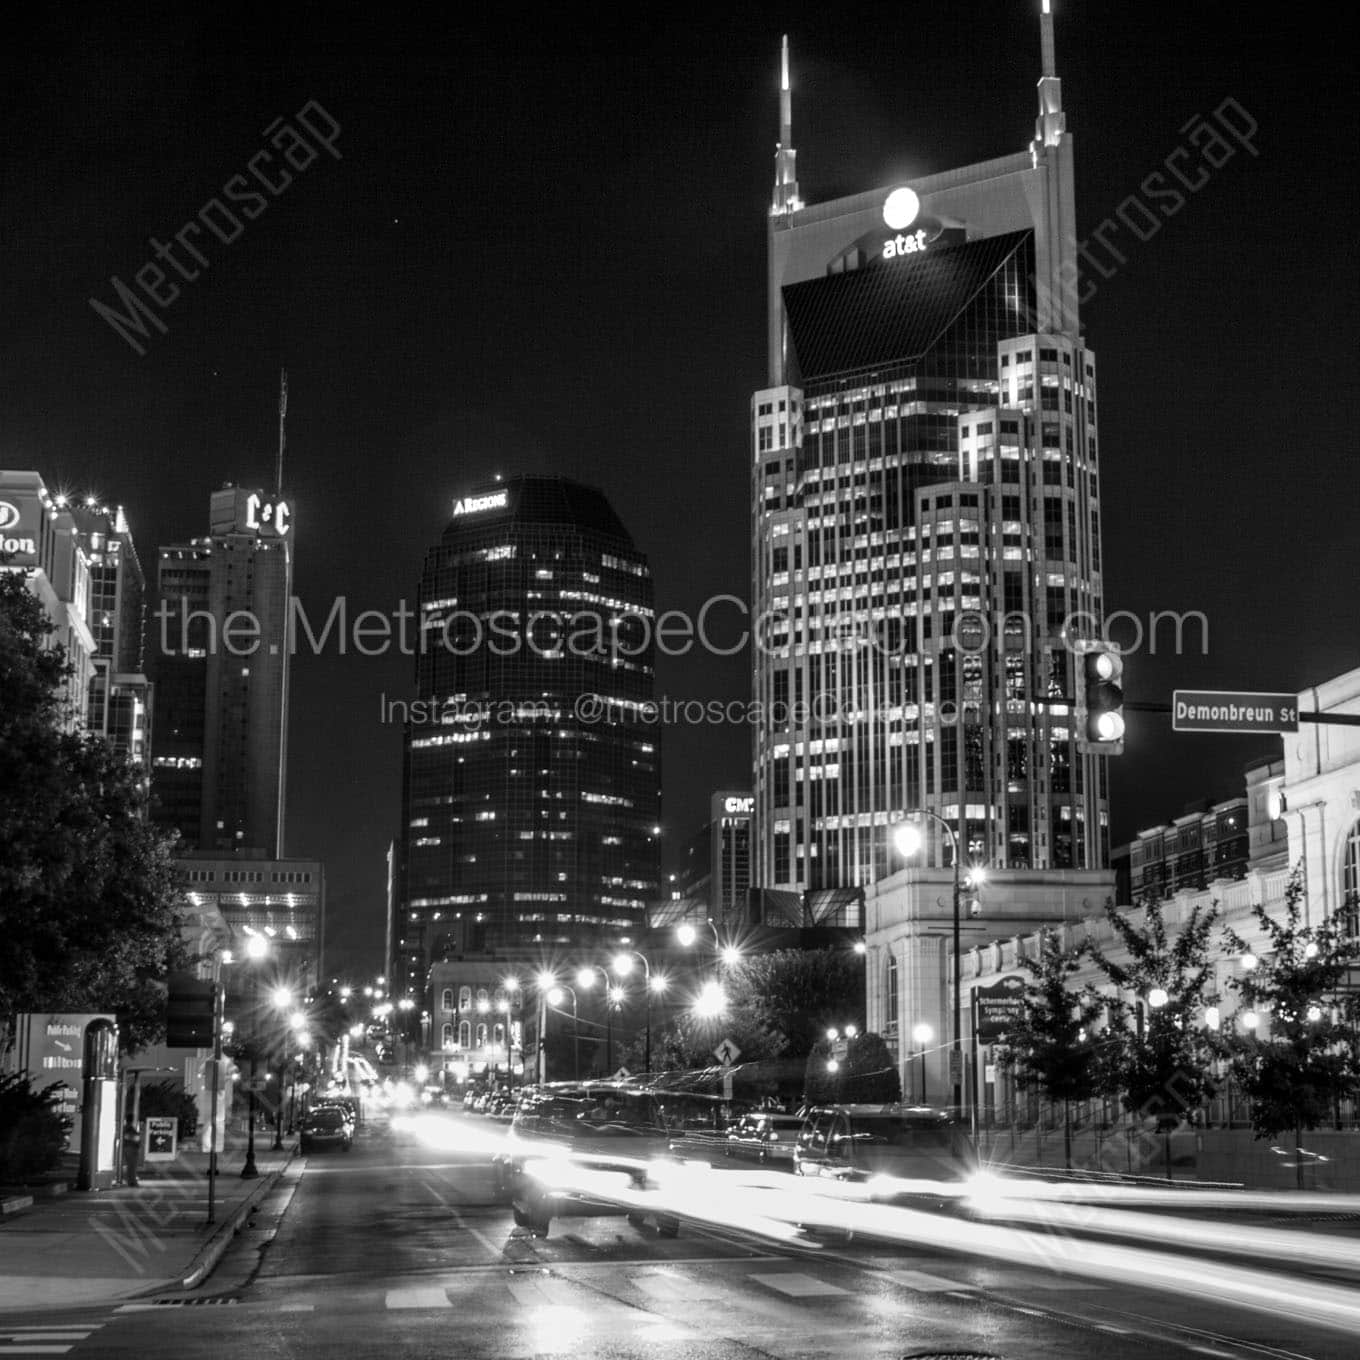 downtown nashville tennessee at night Black & White Office Art